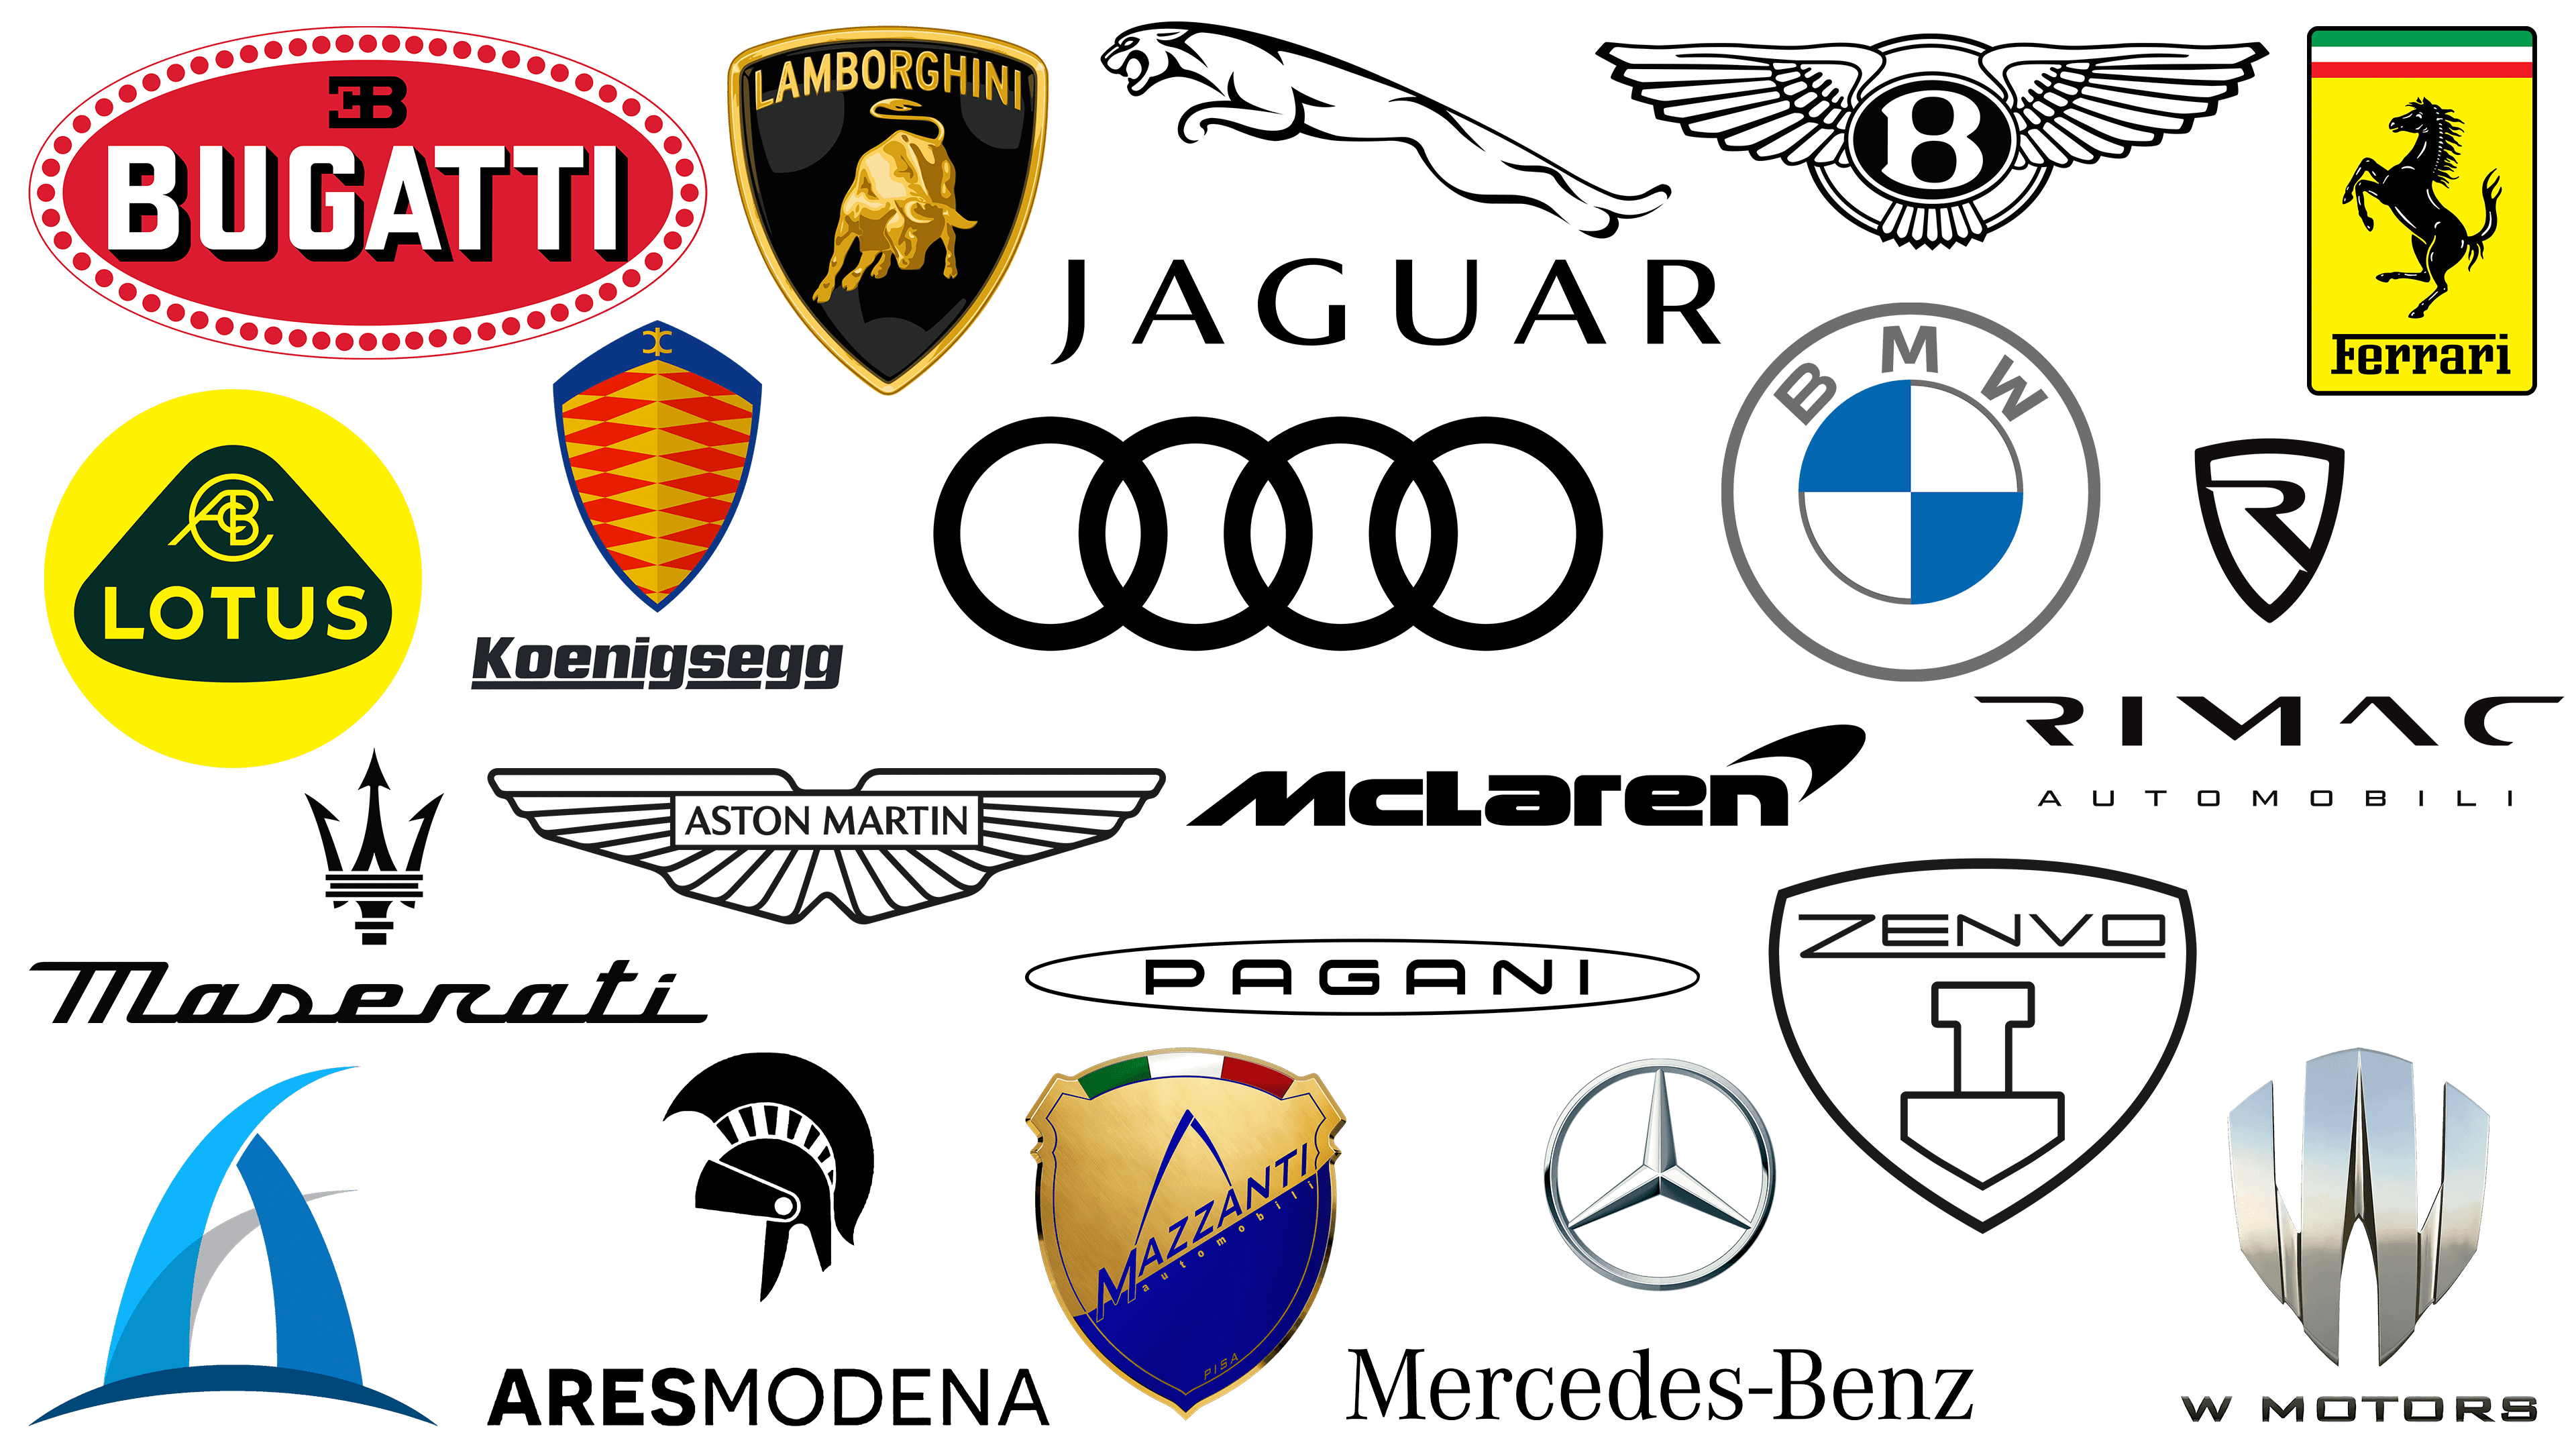 Which car brand is the most luxury?